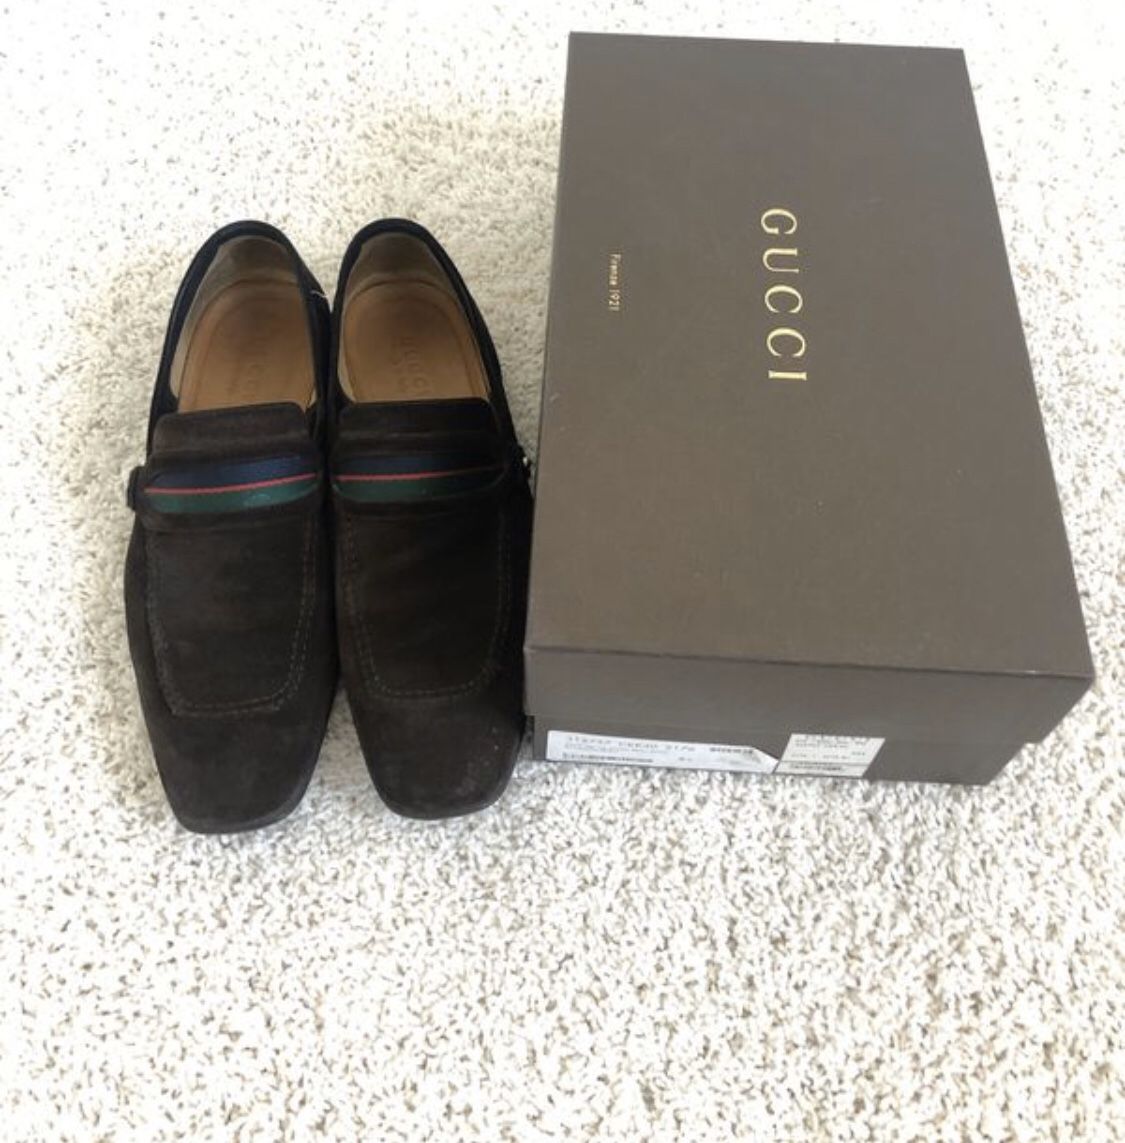 Gucci brown suede shoes.... US 8.5 men’s 100% REAL AND AUTHENTIC